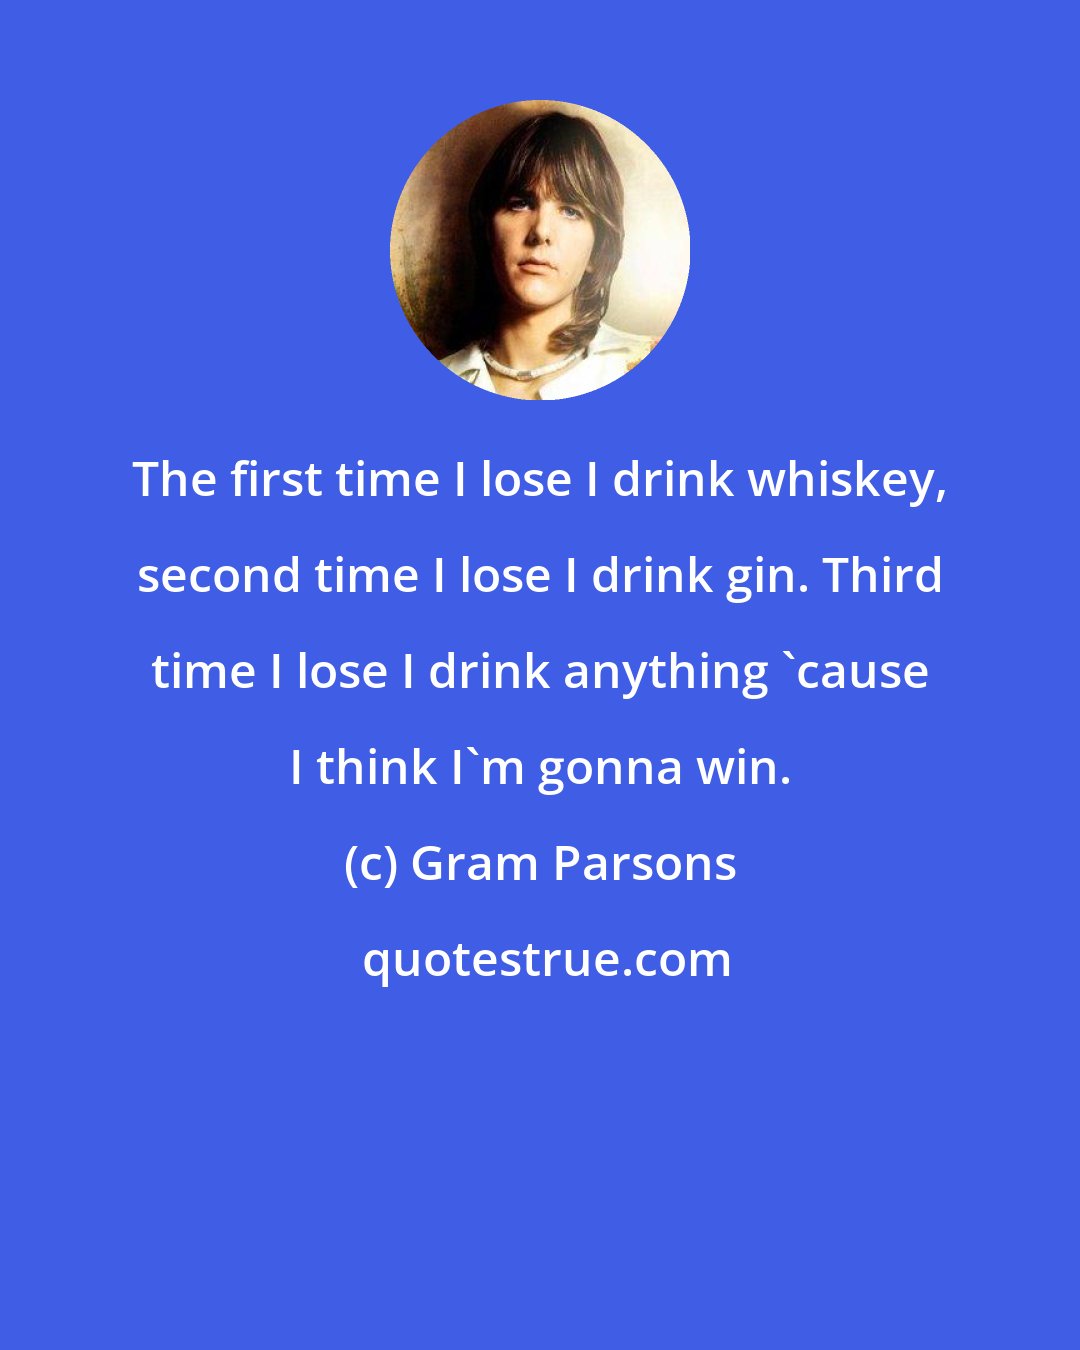 Gram Parsons: The first time I lose I drink whiskey, second time I lose I drink gin. Third time I lose I drink anything 'cause I think I'm gonna win.